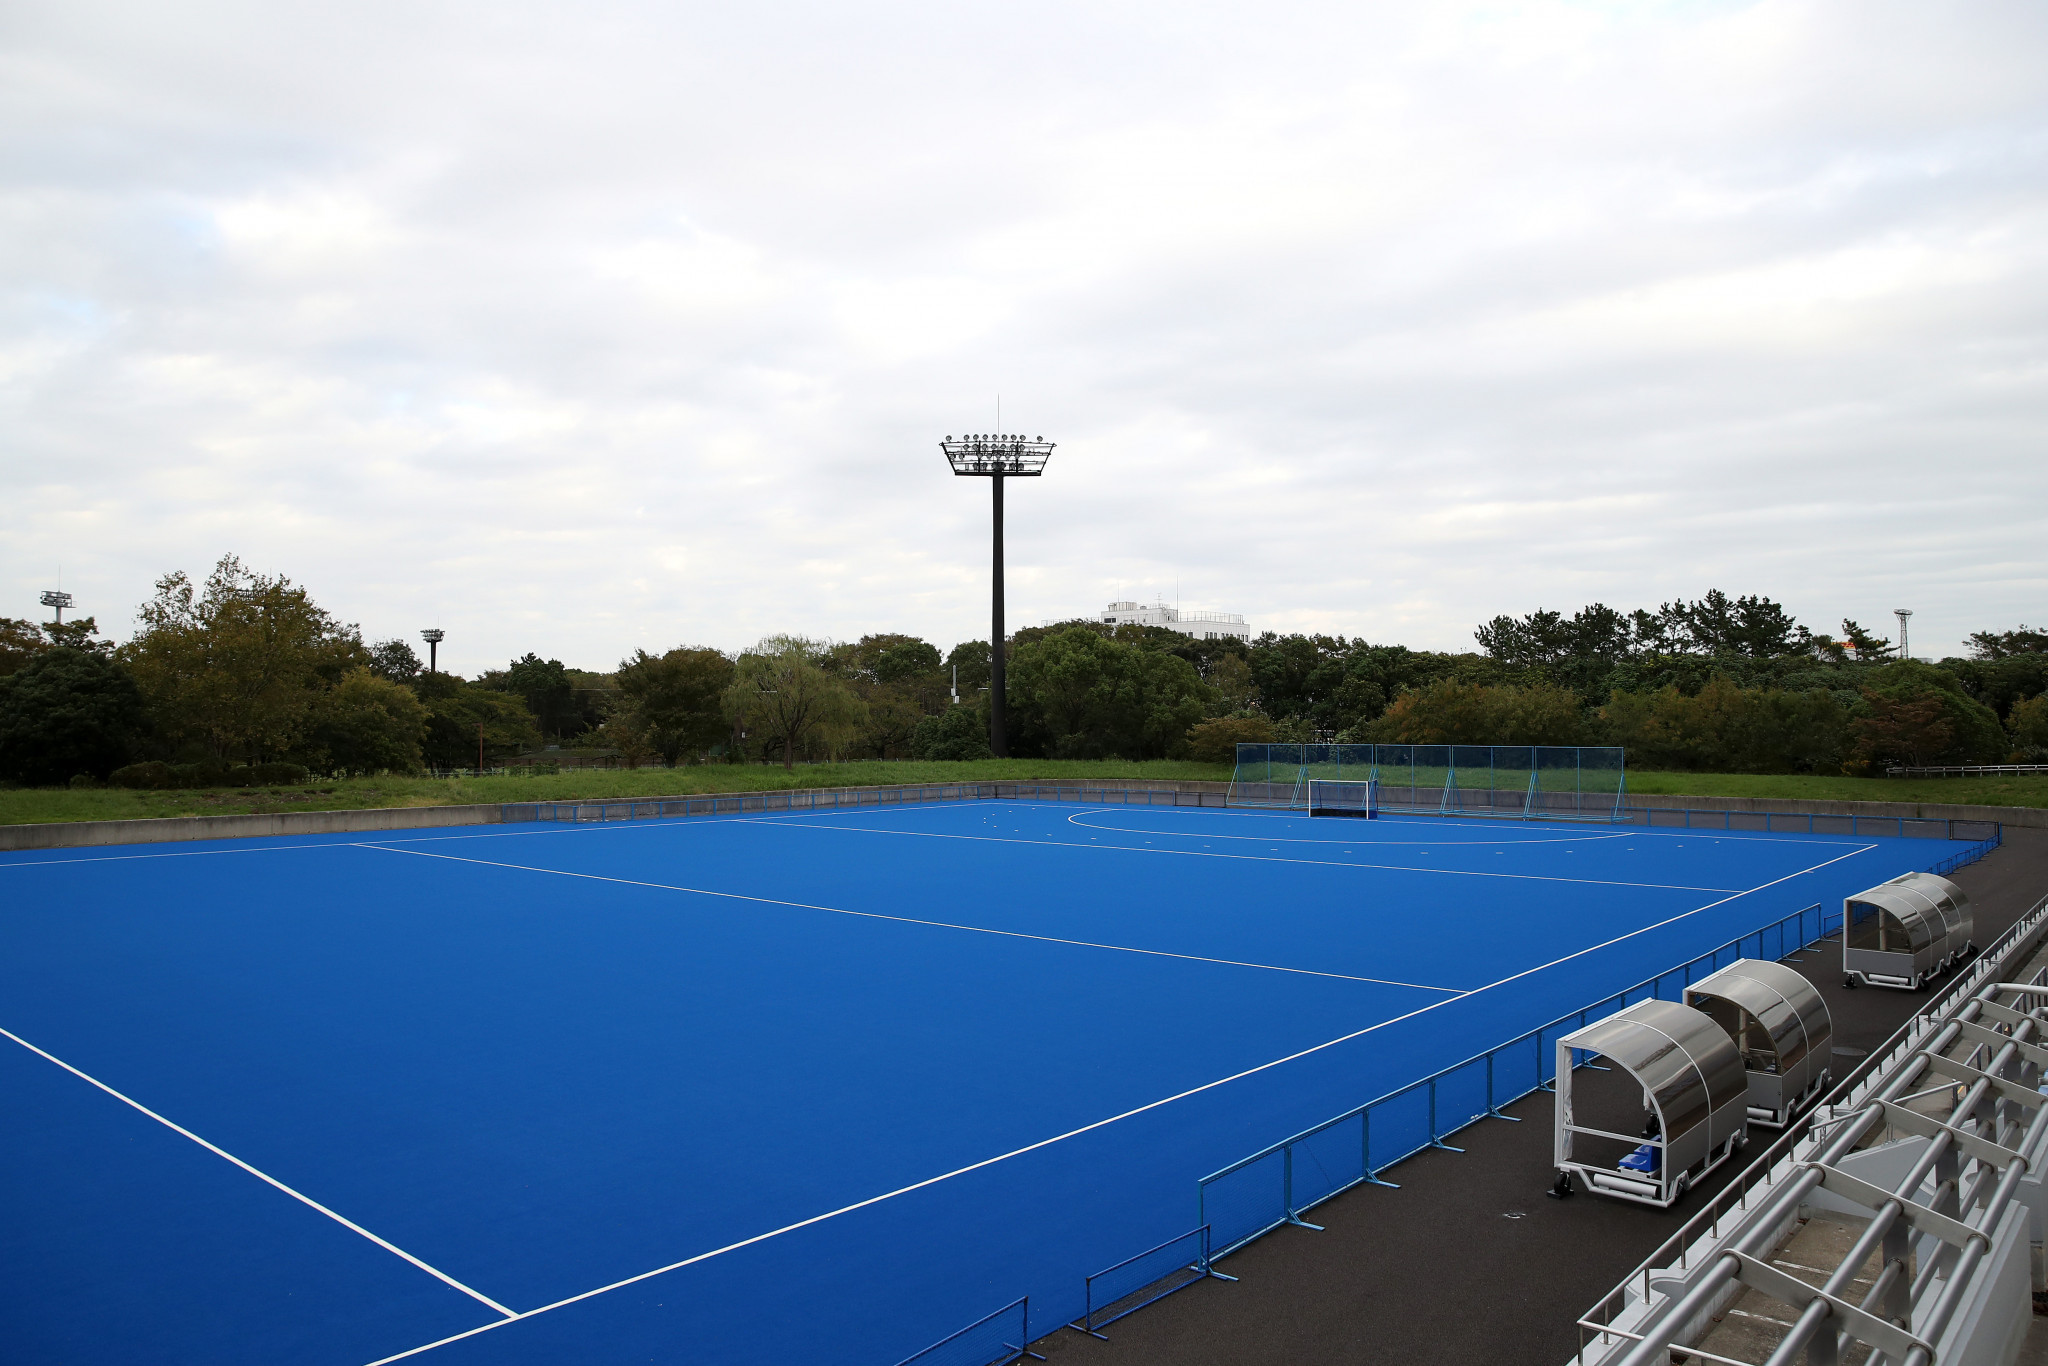 A sustainable hockey pitch has been developed for the Tokyo 2020 Olympic Games ©Getty Images